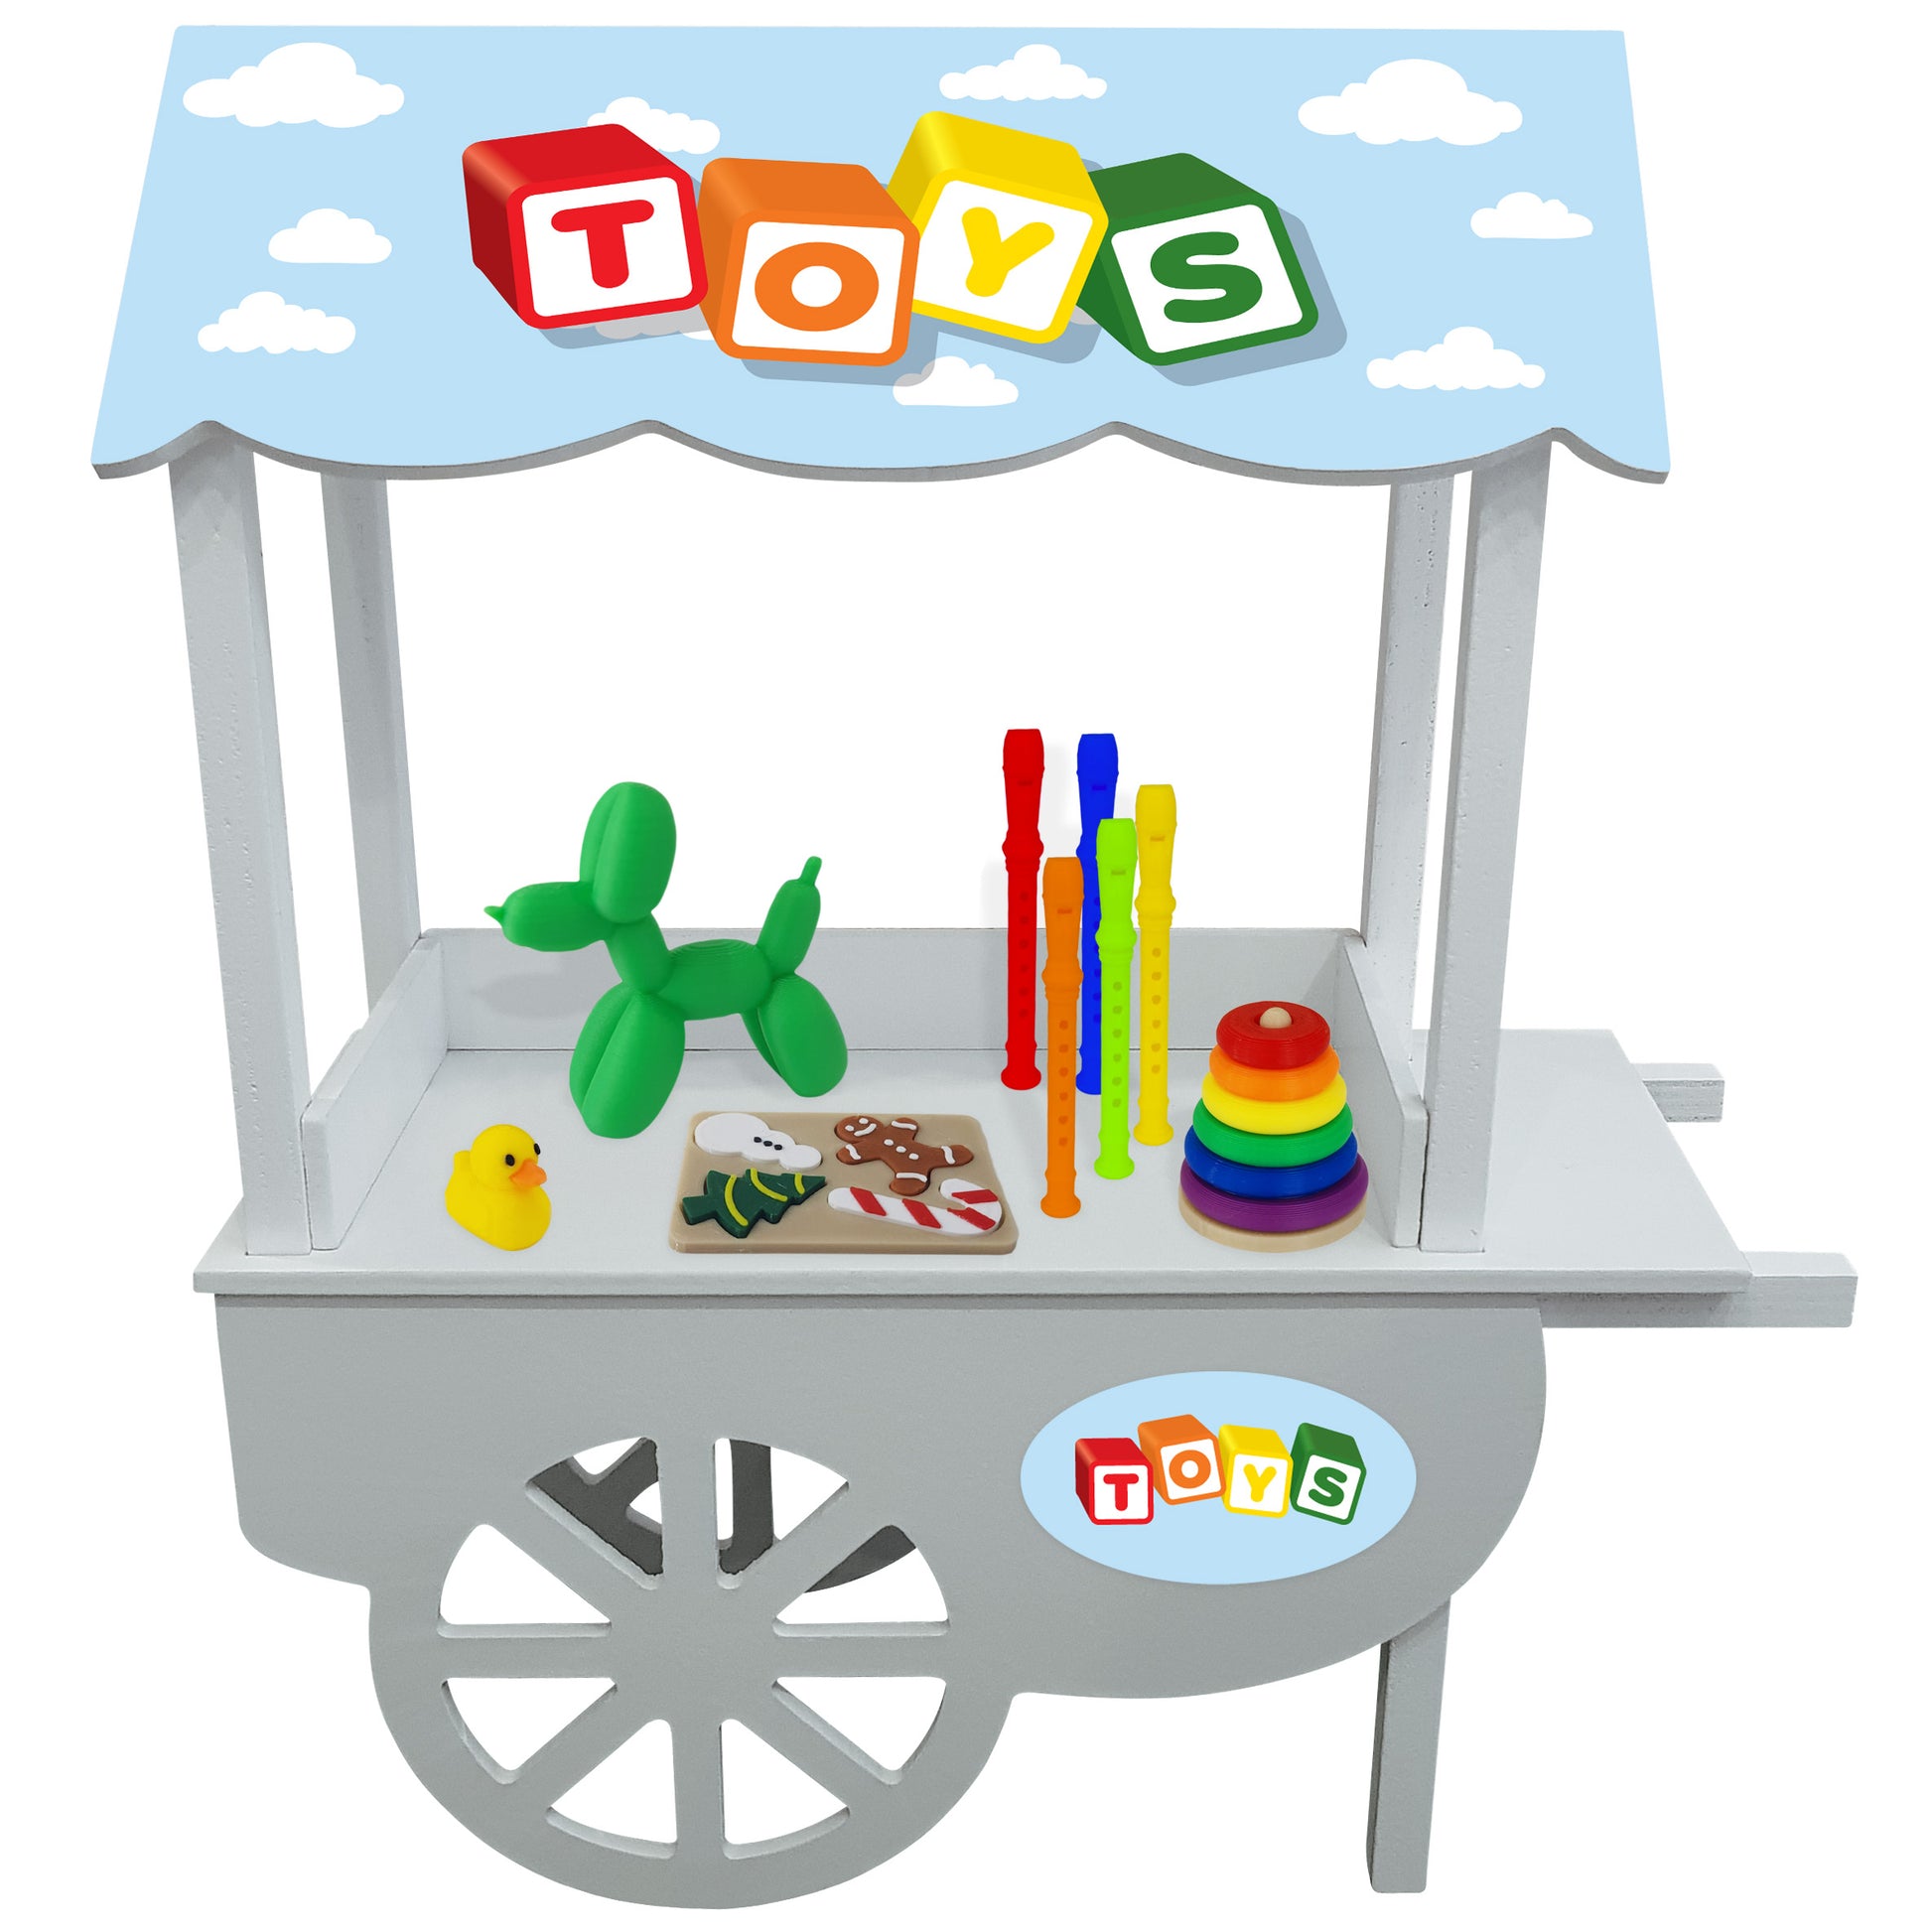 Mini toy shop for elves selling a ring stacker toy, puzzle, mini rubber ducky, balloon dog and elf sized recorders